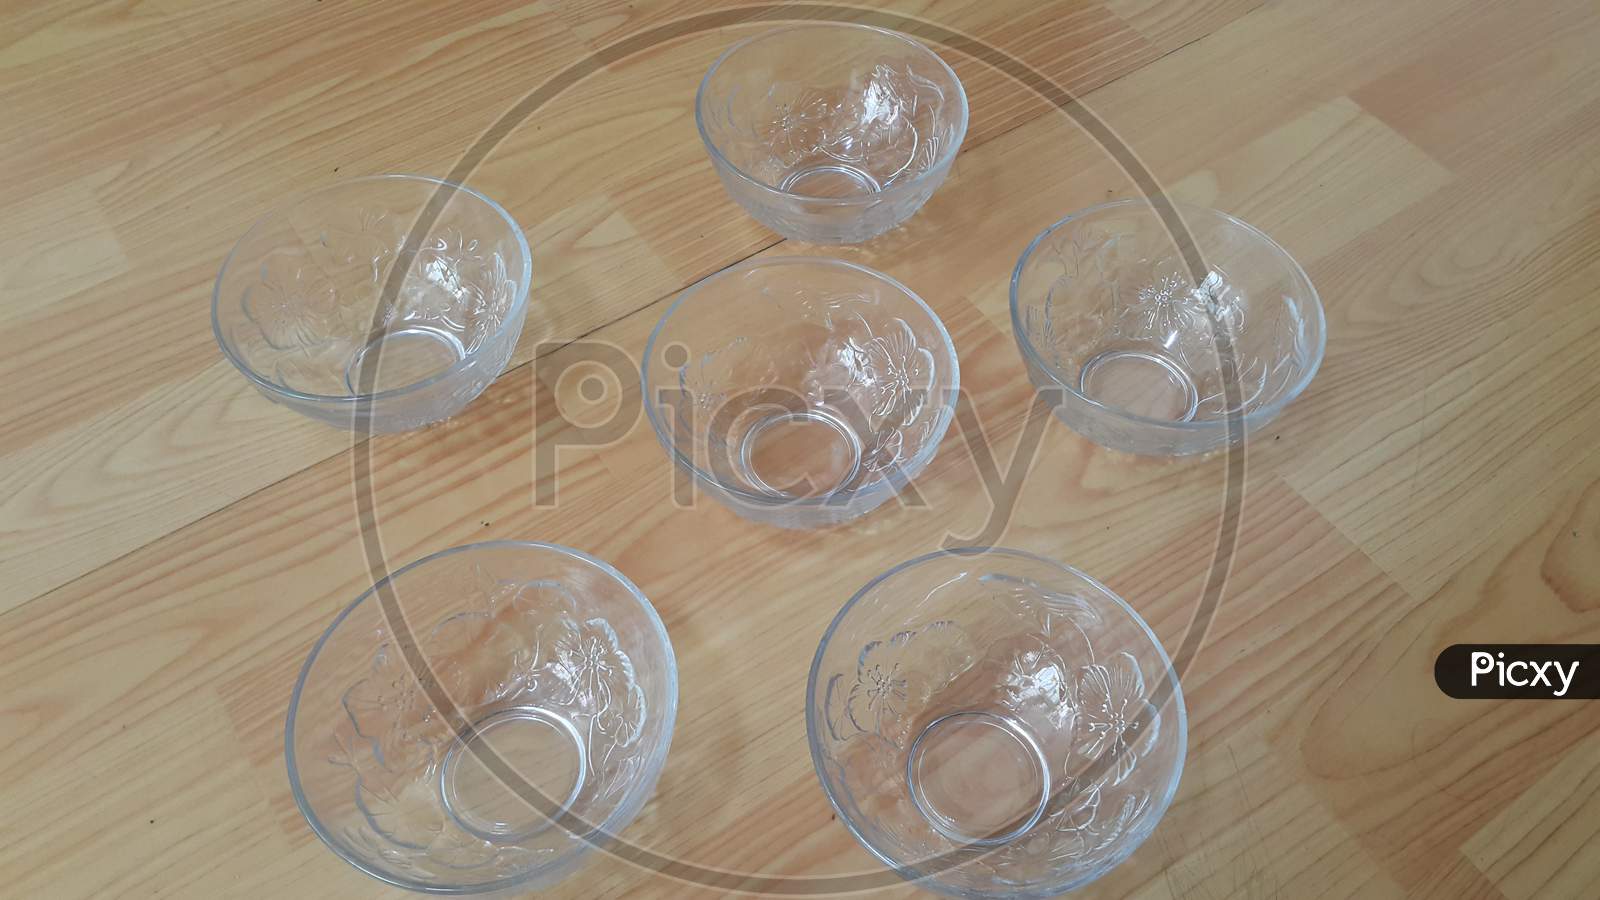 Top View Of Empty White Glass Bowls On A Wooden Floor